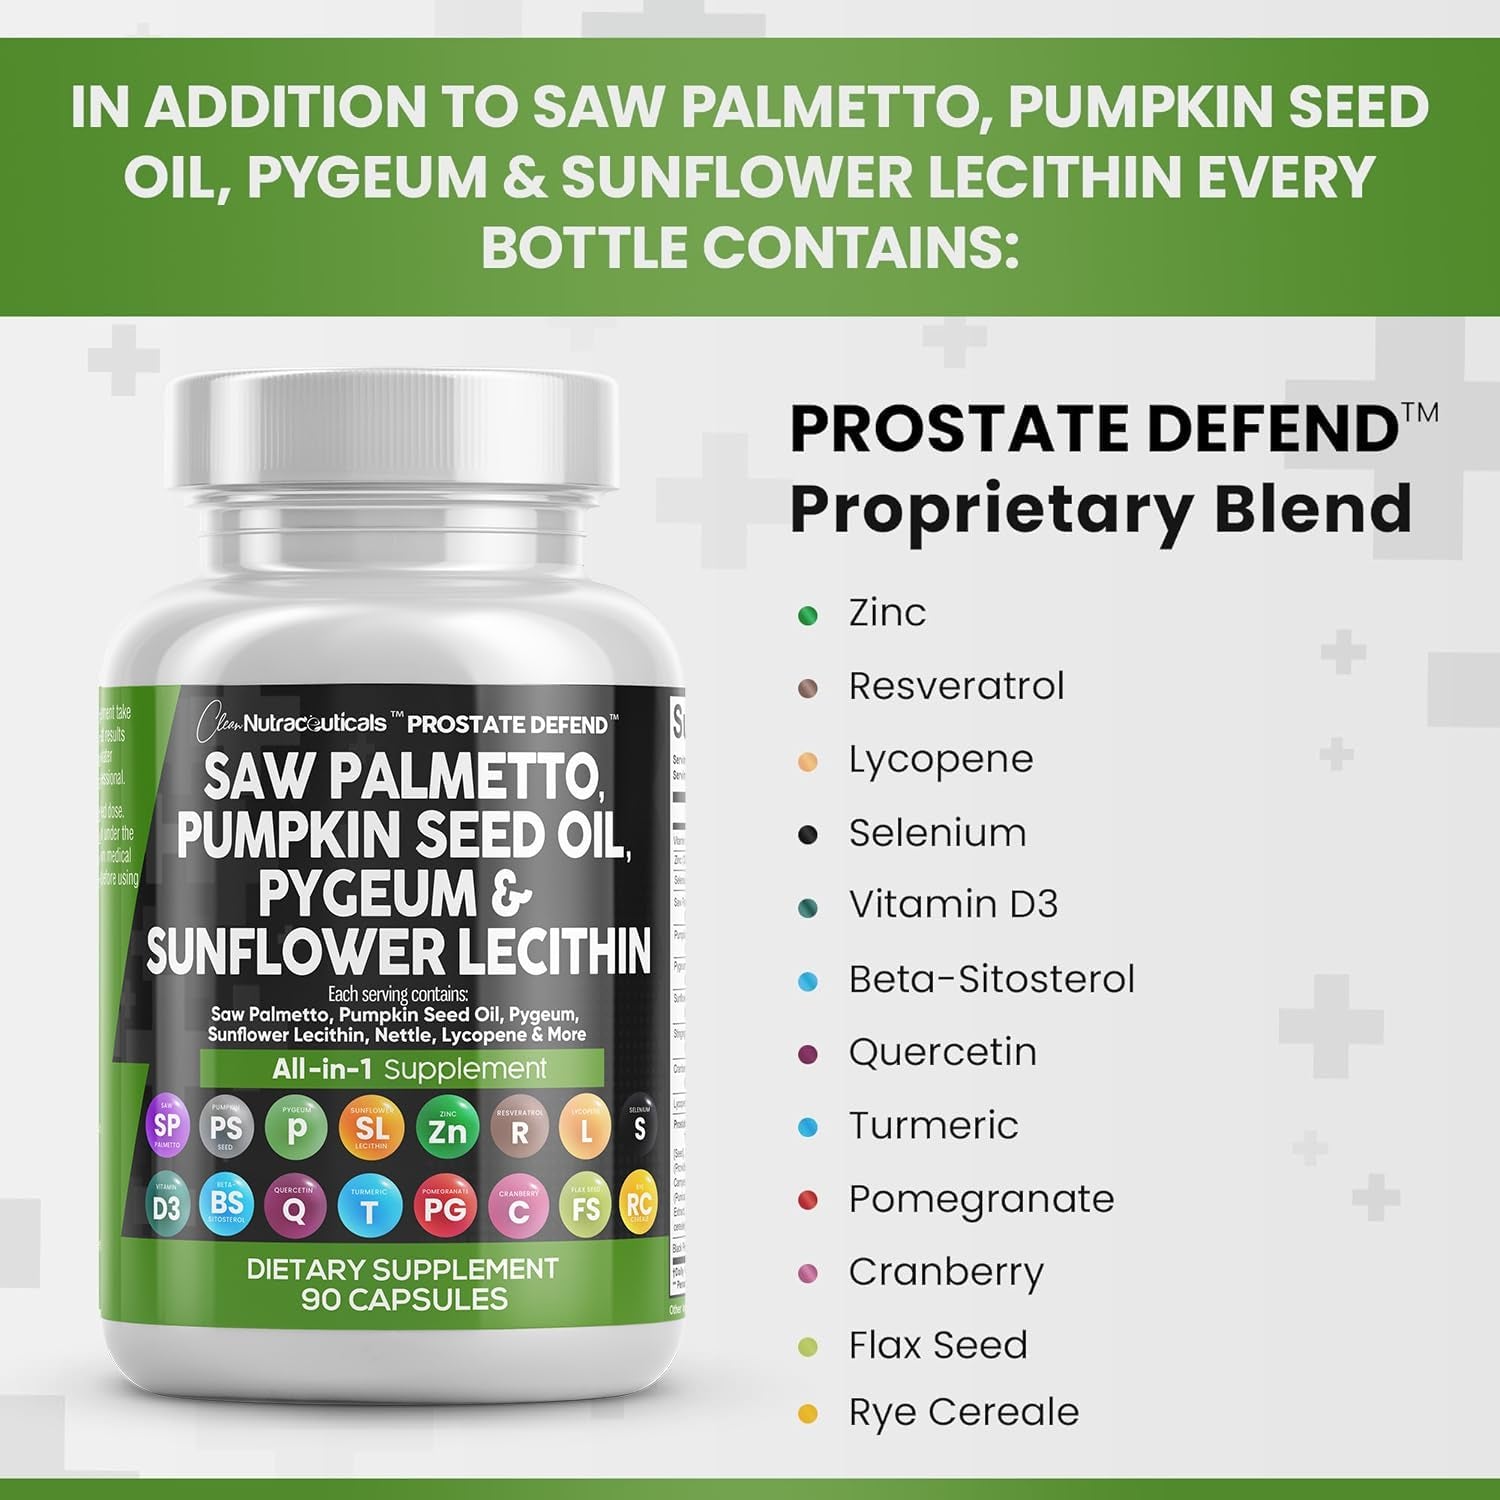 Saw Palmetto 10000Mg Pumpkin Seed Oil 3000Mg Pygeum 3000Mg Sunflower Lecithin 3000Mg Stinging Nettle Cranberry - Prostate Supplements for Men with Lycopene - 90 Caps